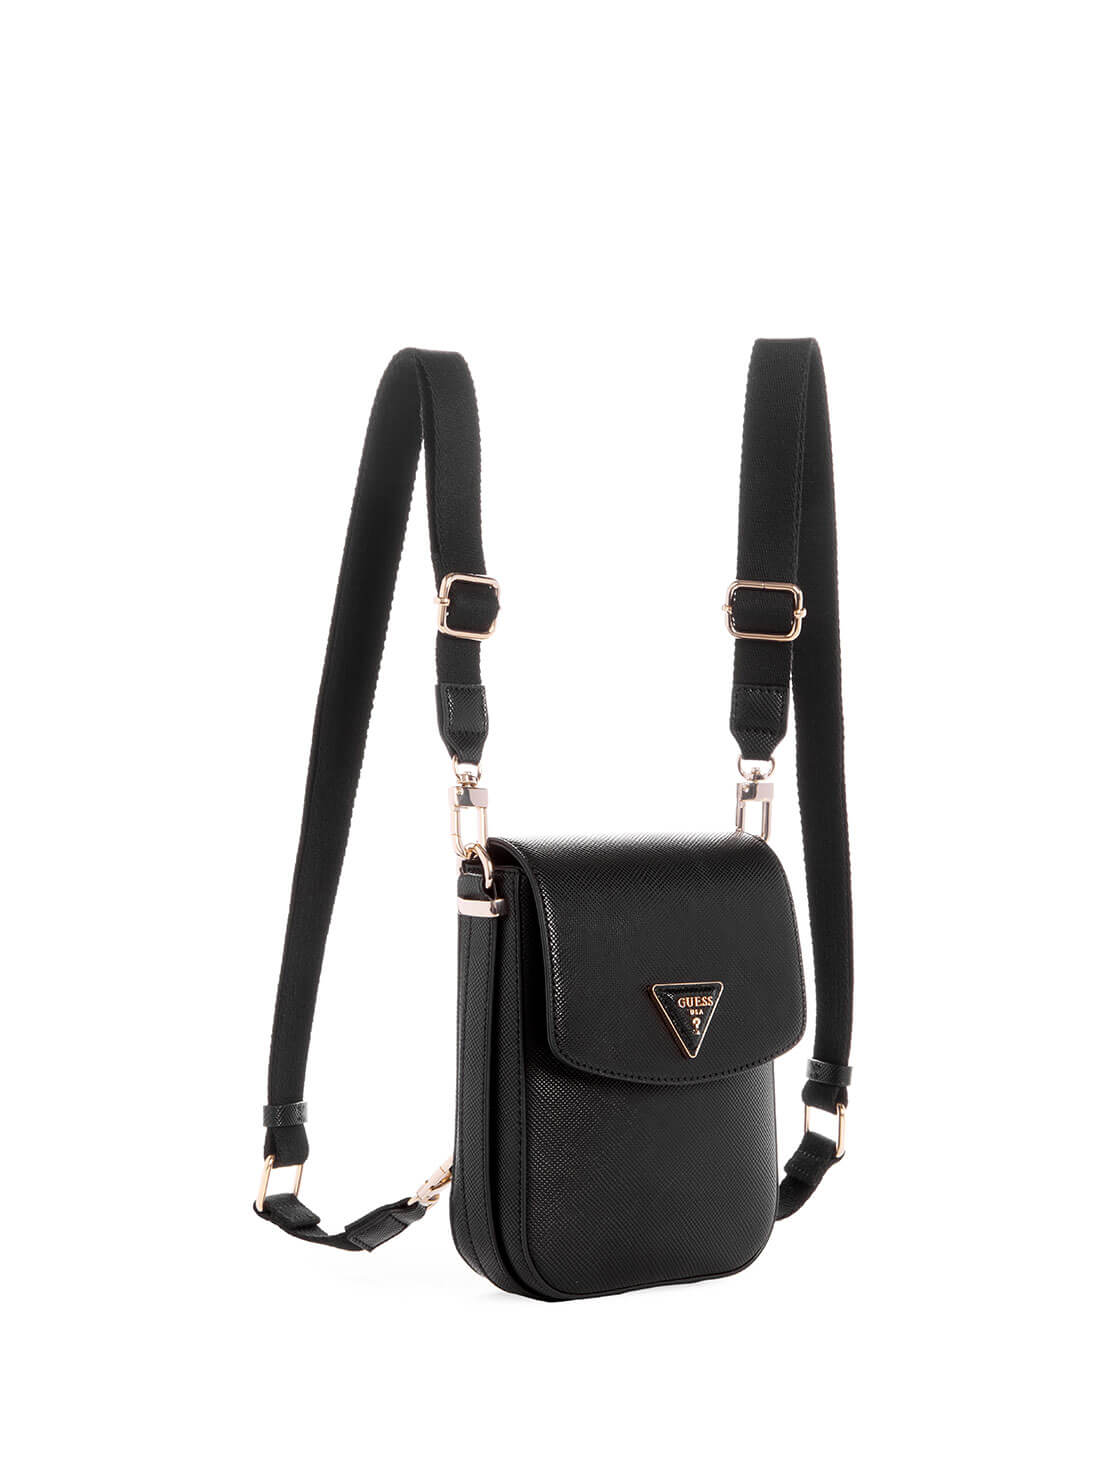 Women's Black Brynlee Mini Convertible Backpack front view alternative